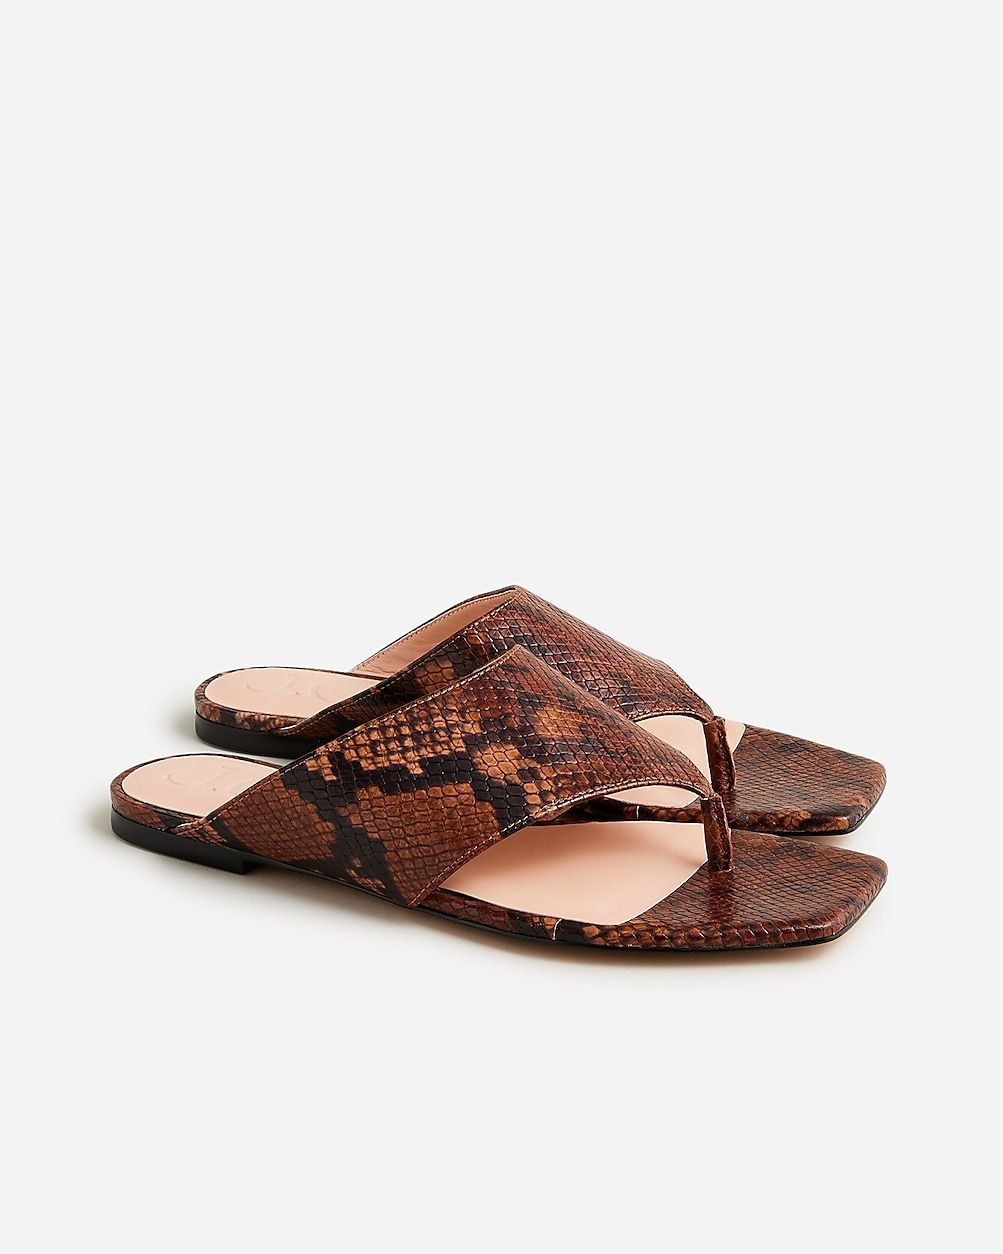 Capri wide thong sandals in snake-embossed leather | J.Crew US